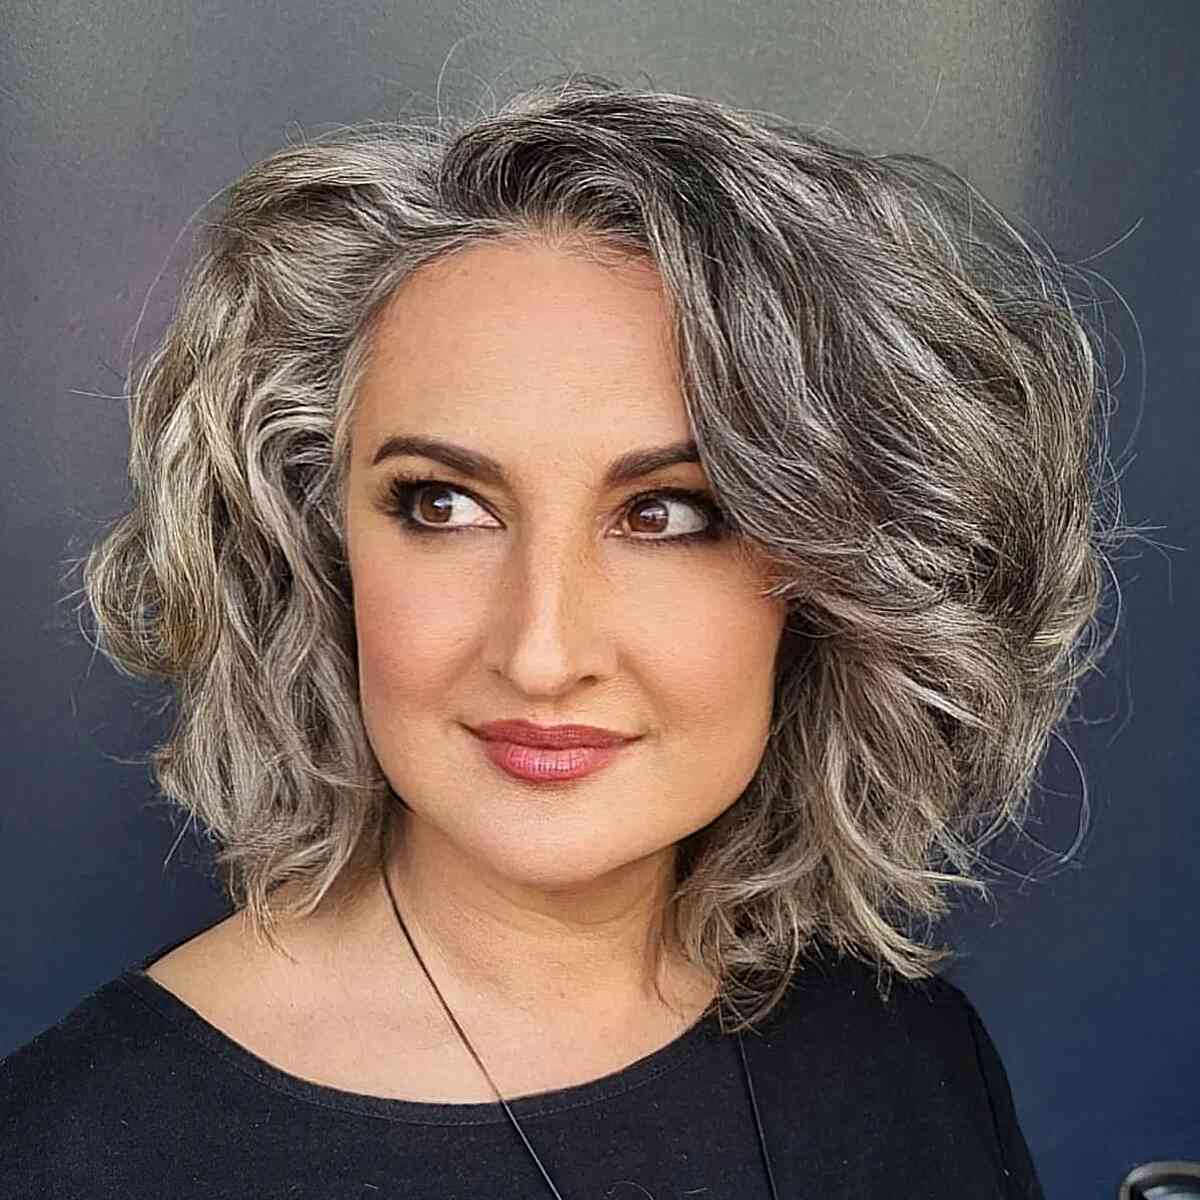 52 Most Flattering Hairstyles For Square Faces